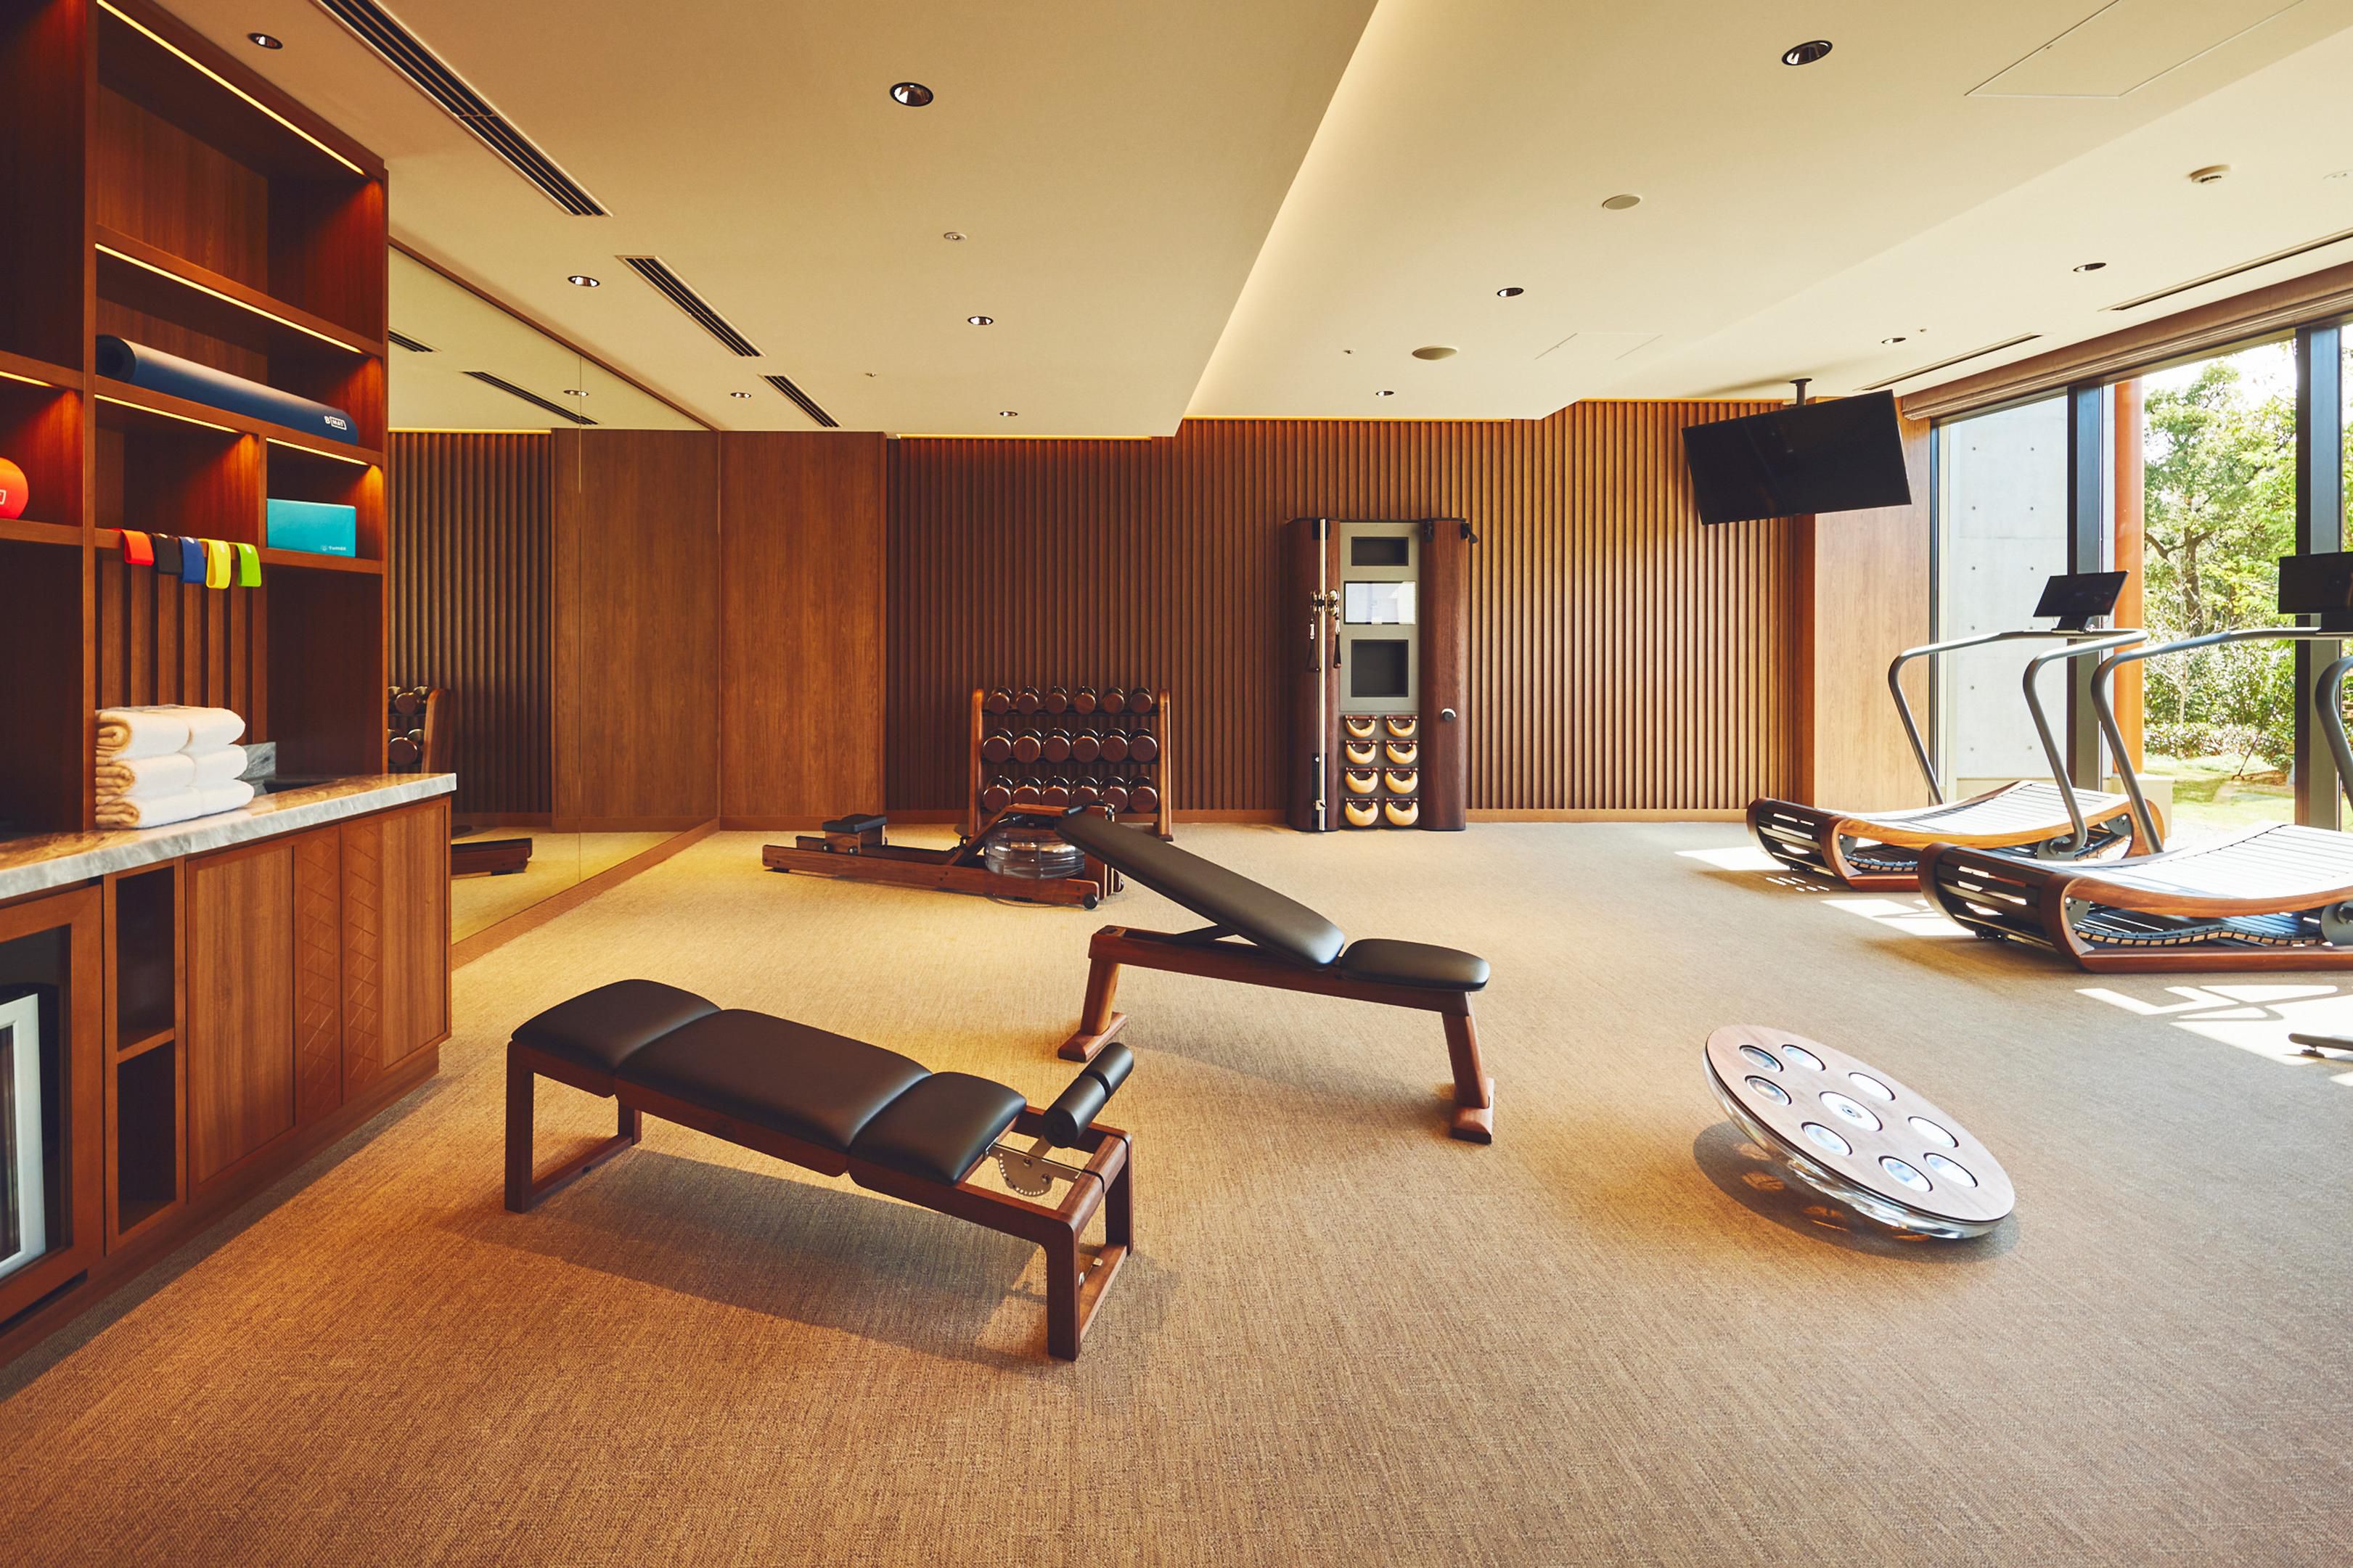 The fitness centre features renewable wood machines carefully selected from US and German forests to minimise environmental impact. Rather than being operated by power, our equipment uses self-propelling and water resistance technology to help you reconnect with your body and nature.